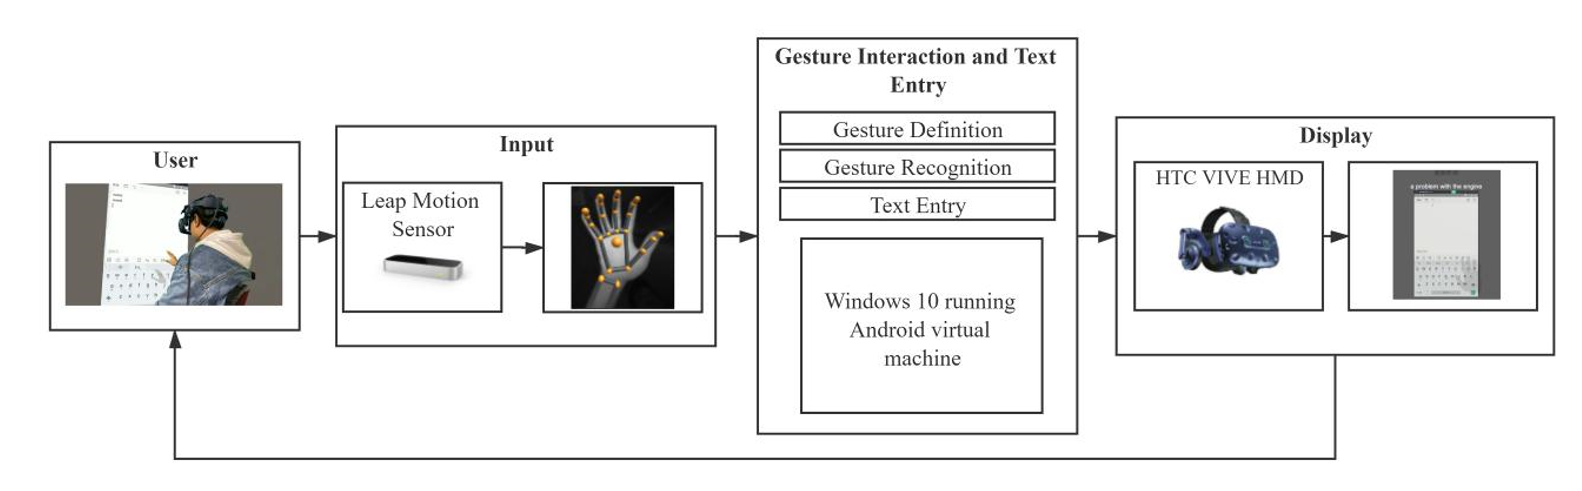 Proposal of Character Input Method for Smartphone Using Hand Movement